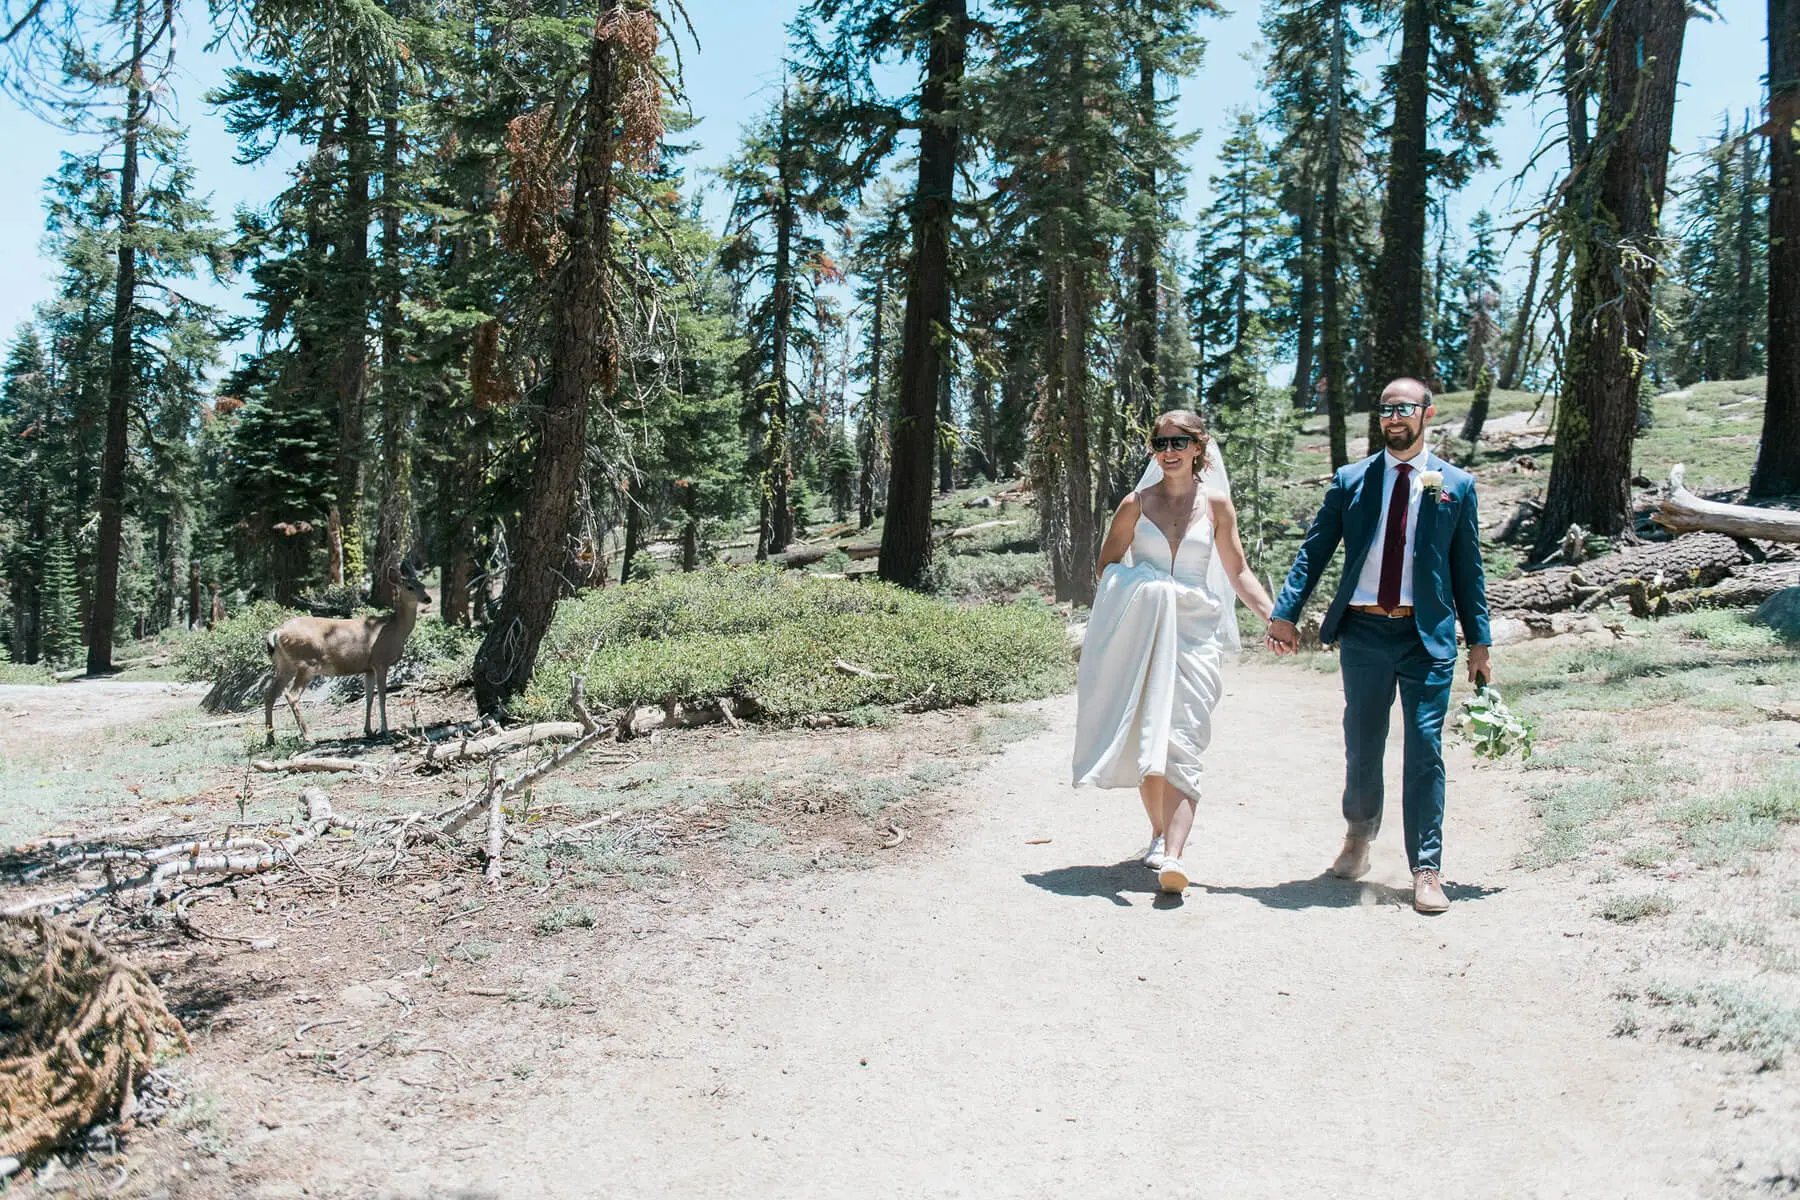 bride and groom walking on trail next to deer on way to taft point photo shoot